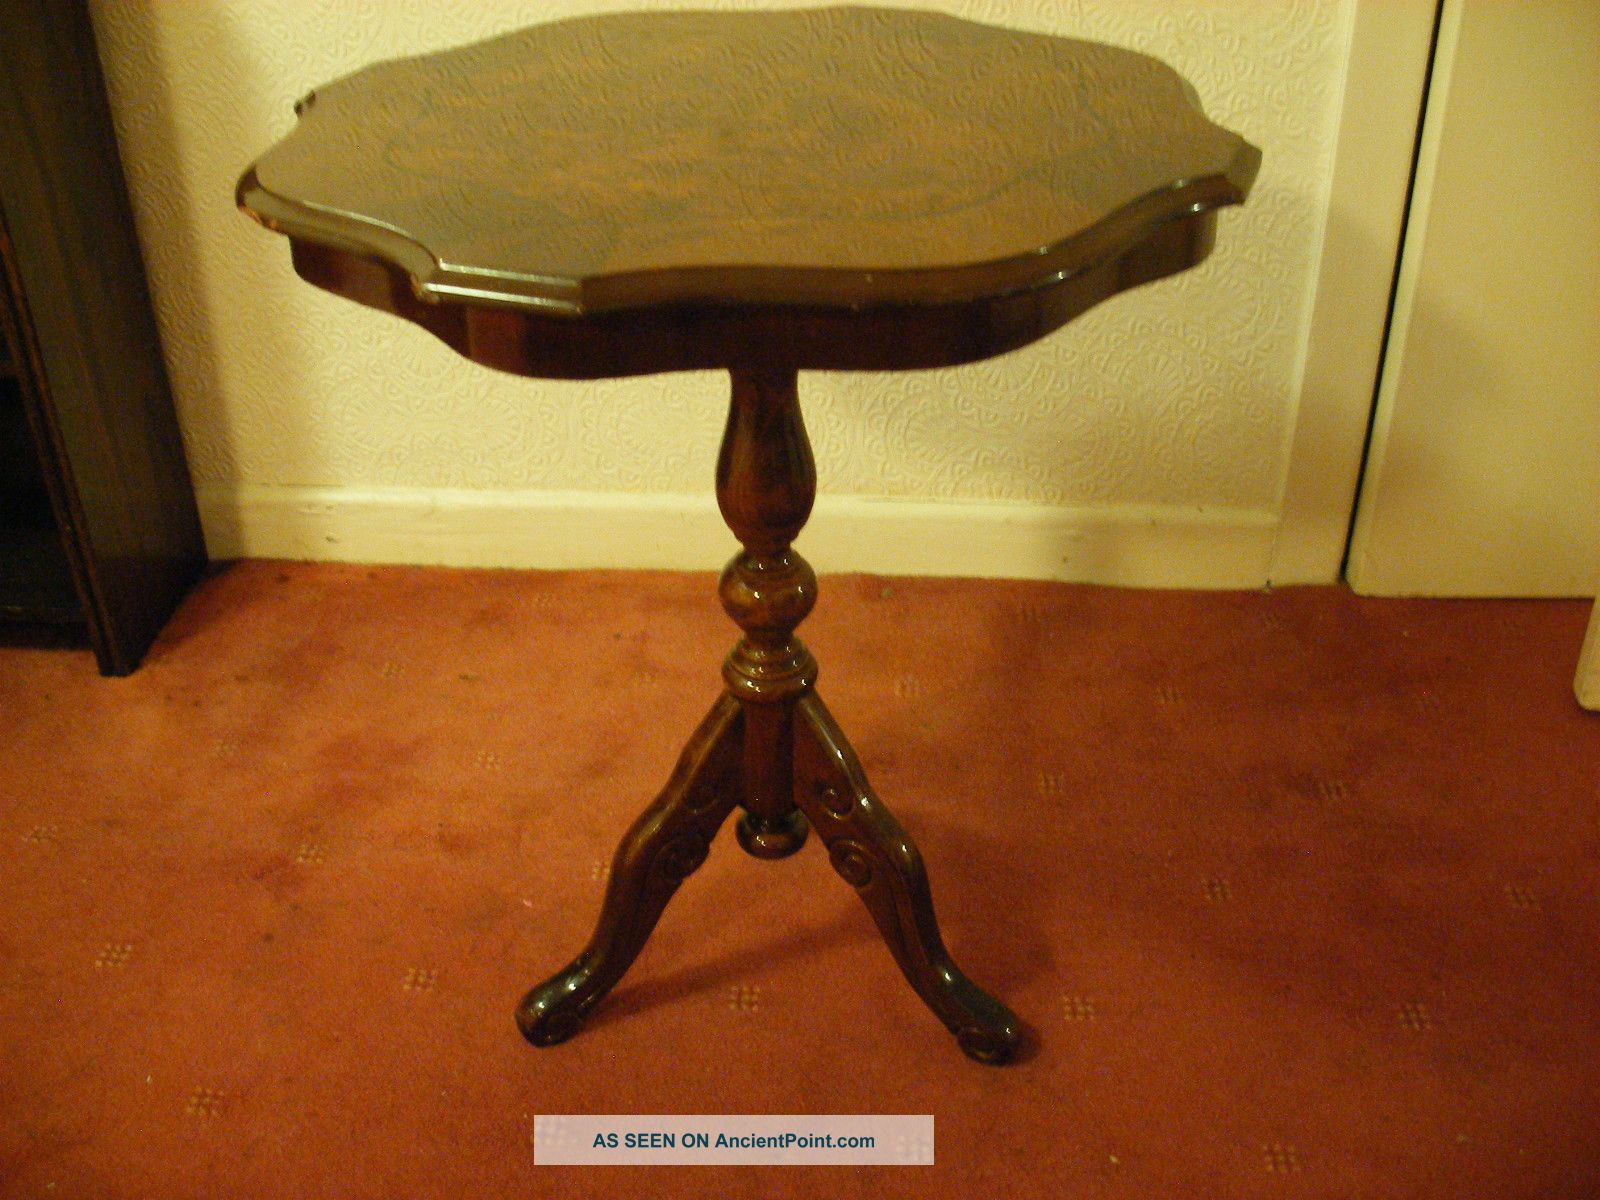 Retro Reproduction Antique Occasional Wine Table Stunning Bargain Reproduction Tables photo